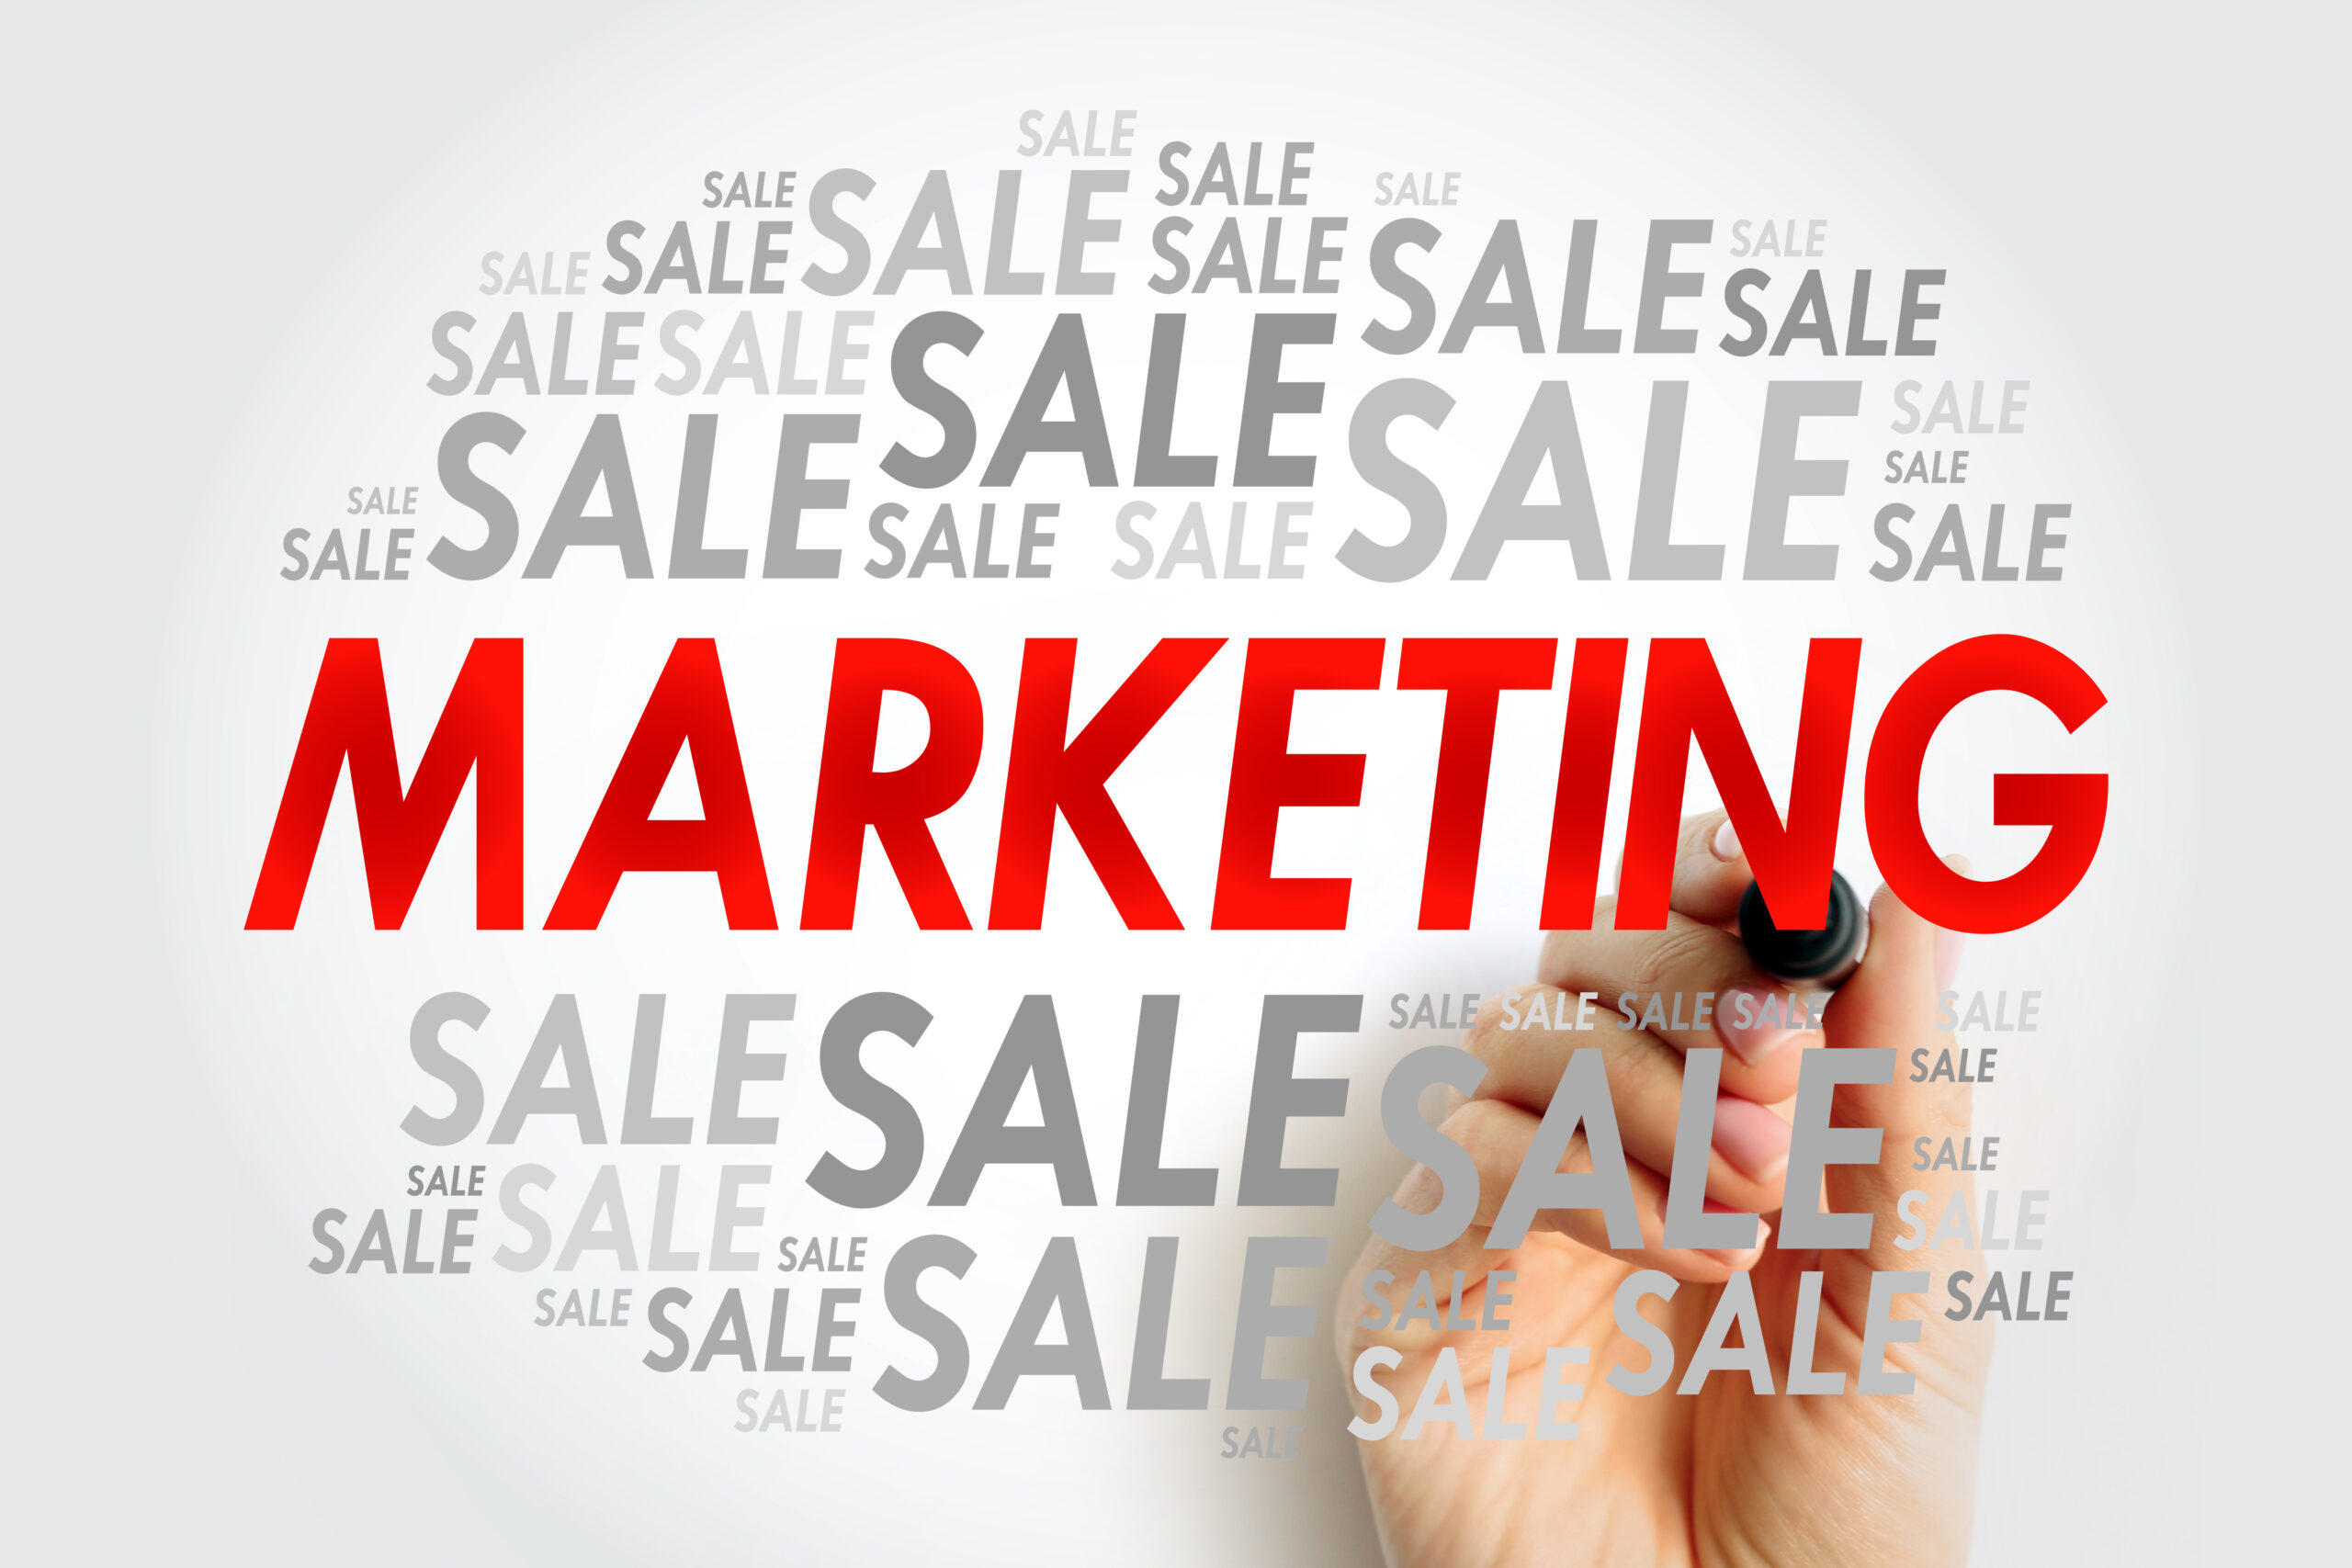 Marketing a Business for Sale